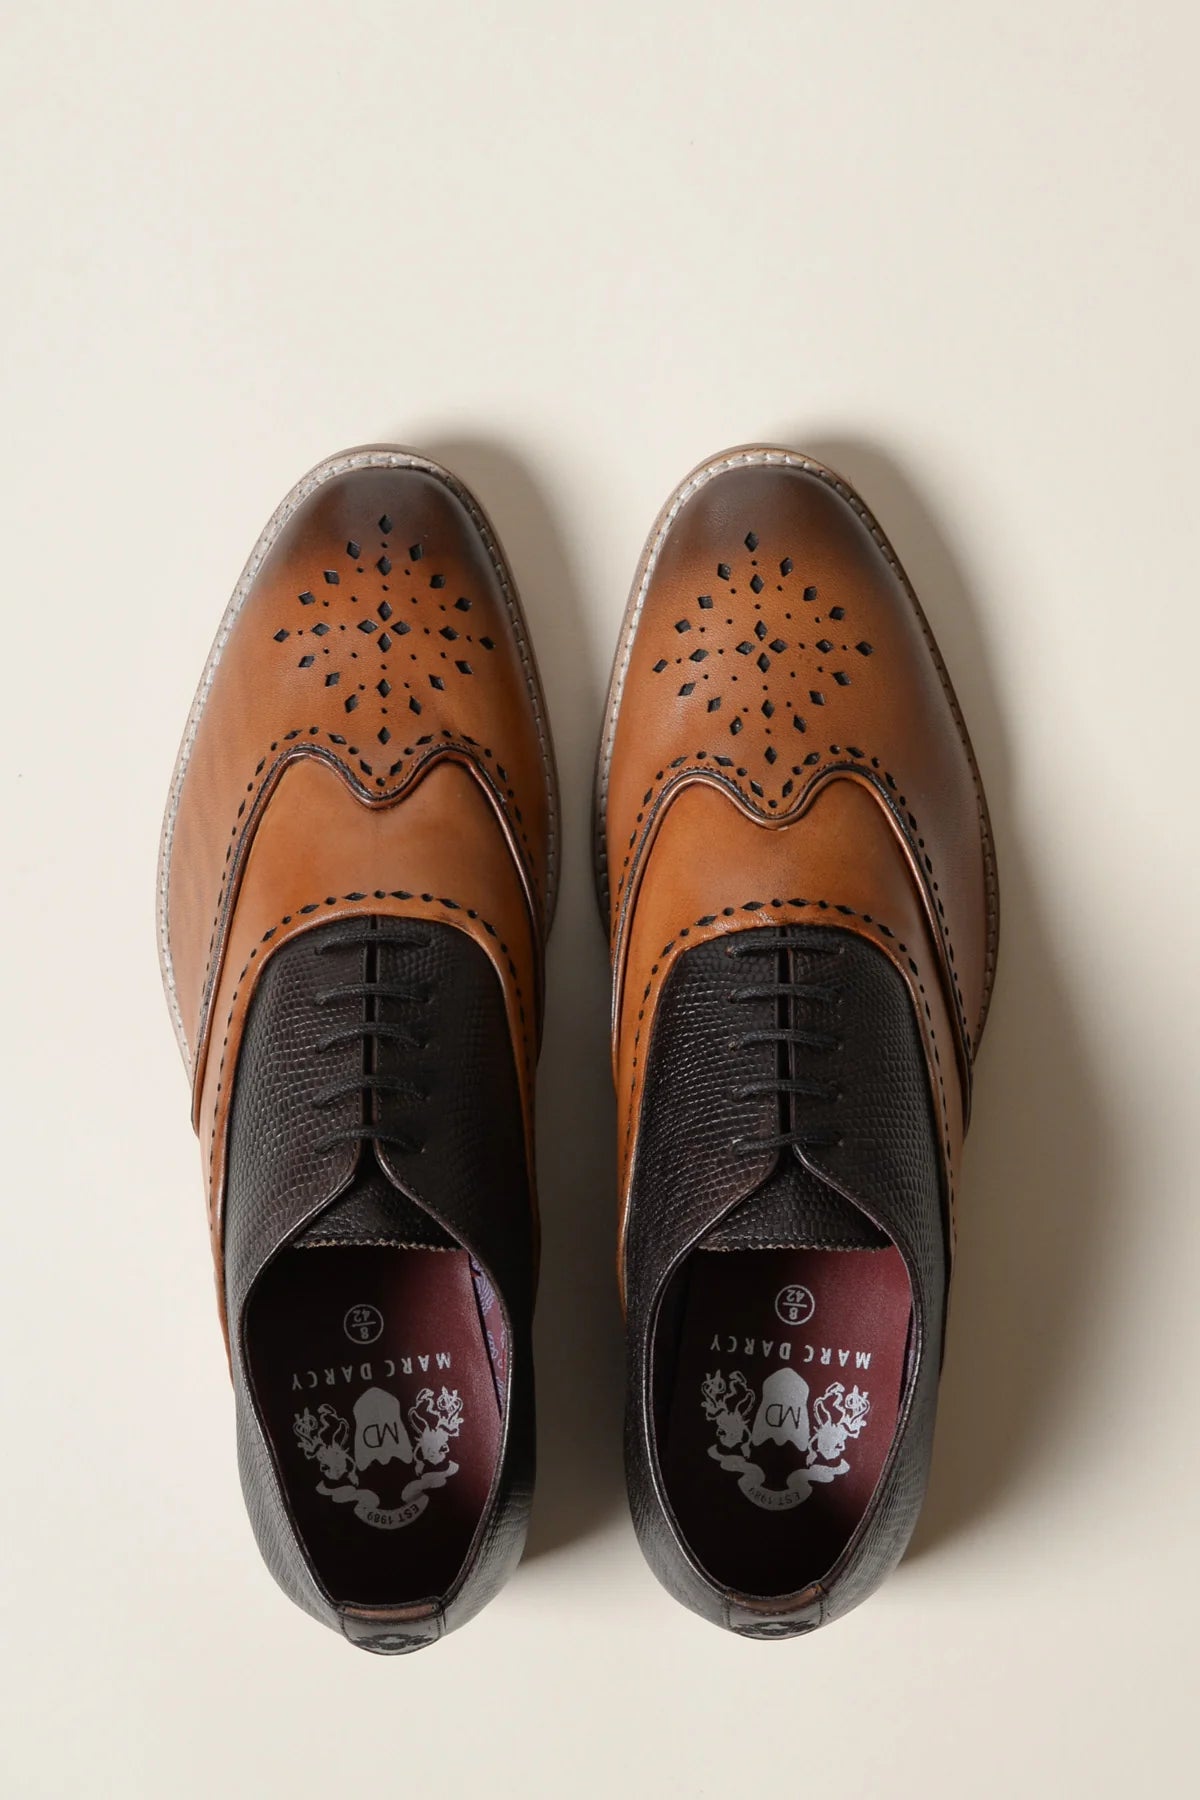 Marc Darcy Ryan Tan / Brown Leather Brogue Shoes